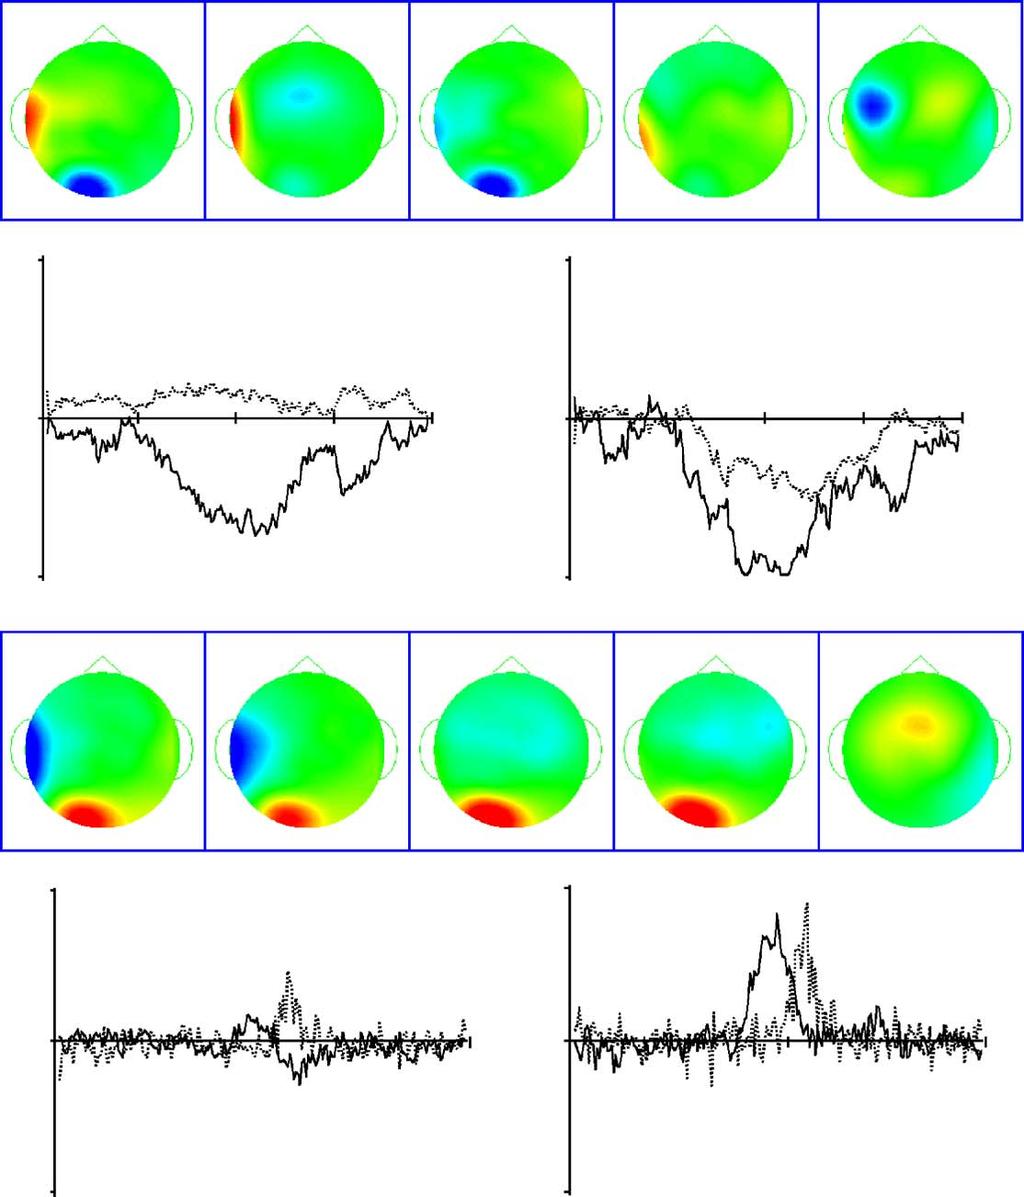 J.E. Richards / International Journal of Psychophysiology 54 (2004) 201 220 213 Fig. 6. First five ICA and PCA components for the Additive Sources, Temporal Overlap dataset.